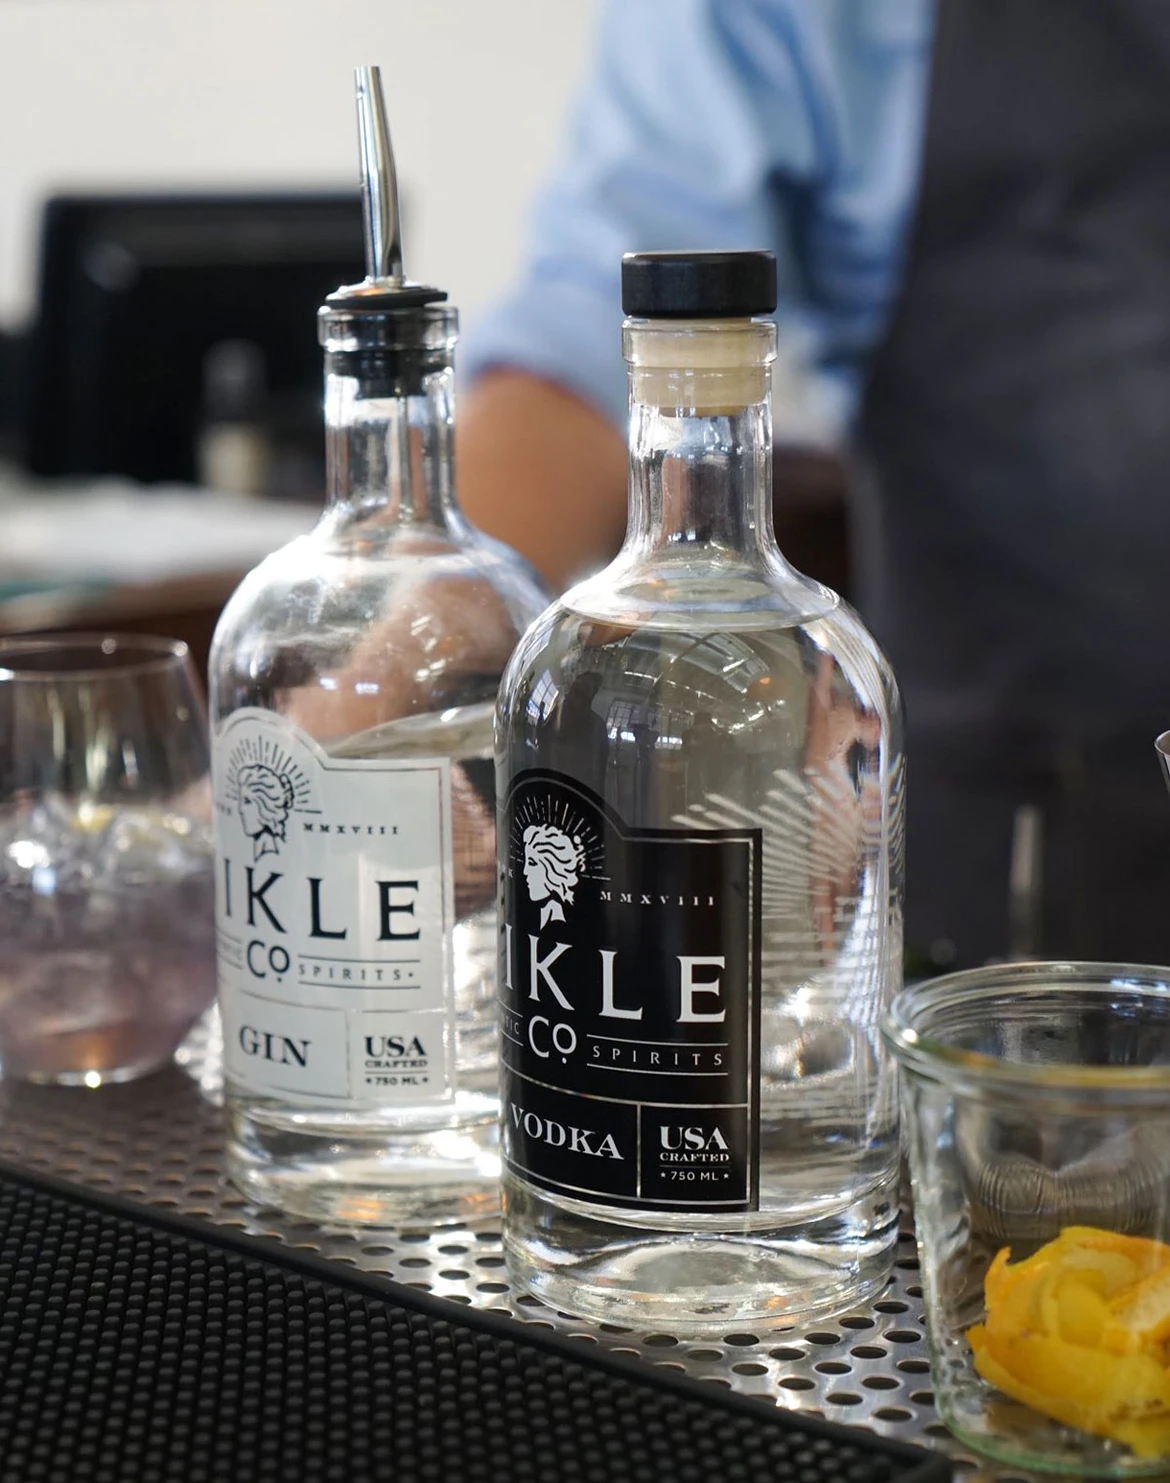 Nikle Co. Vodka and Gin